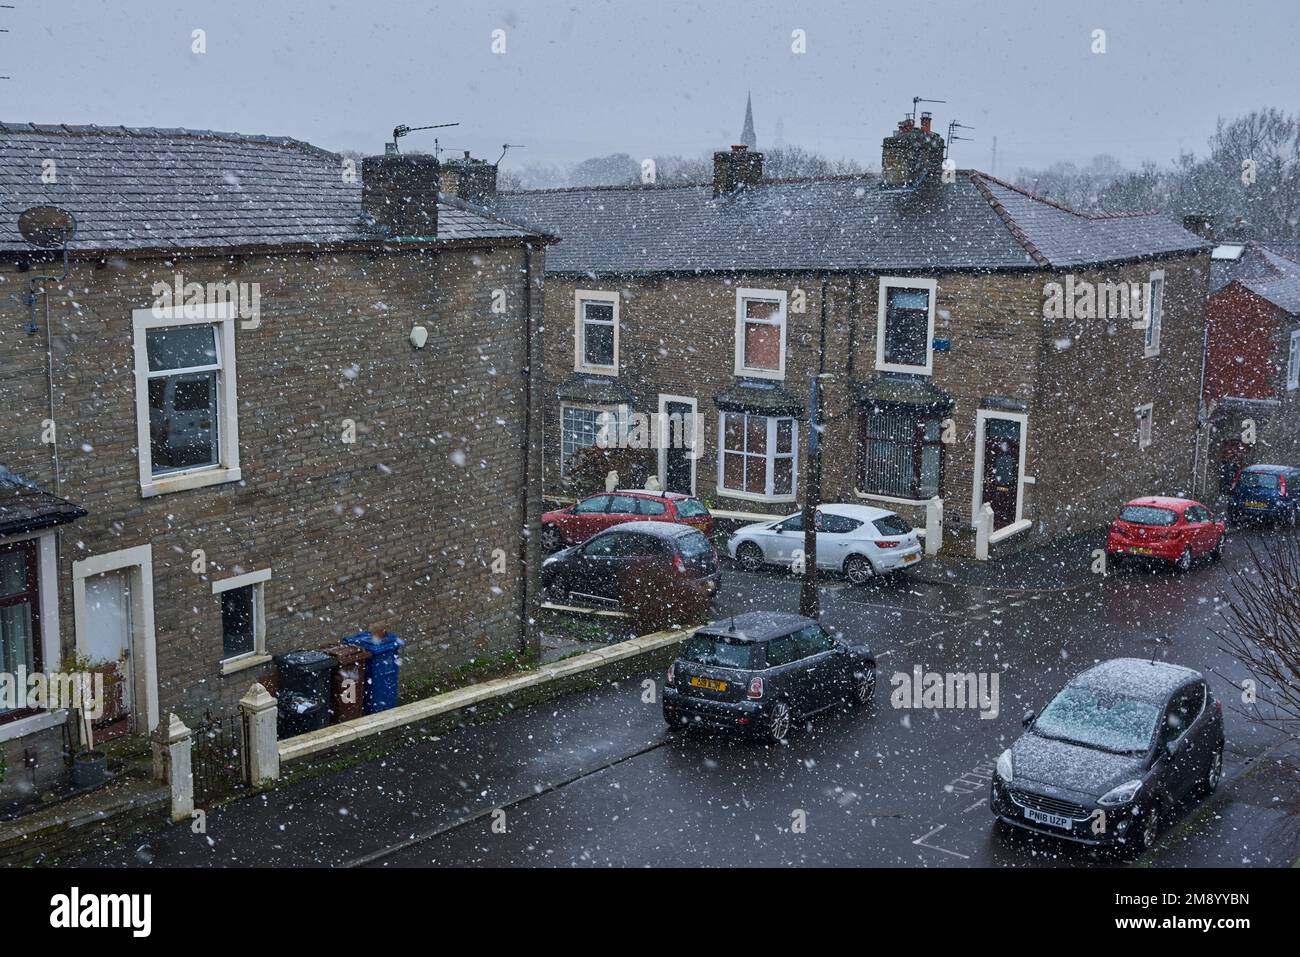 Great Harwood, Lancashire, UK. 16th Jan, 2023. Snow begins to fall in the market town of Great Harwood, Lancashire, the beginning of an expected spell of heavy snowfall in the North of England. Credit: Garry Cook/Alamy Live News. Stock Photo